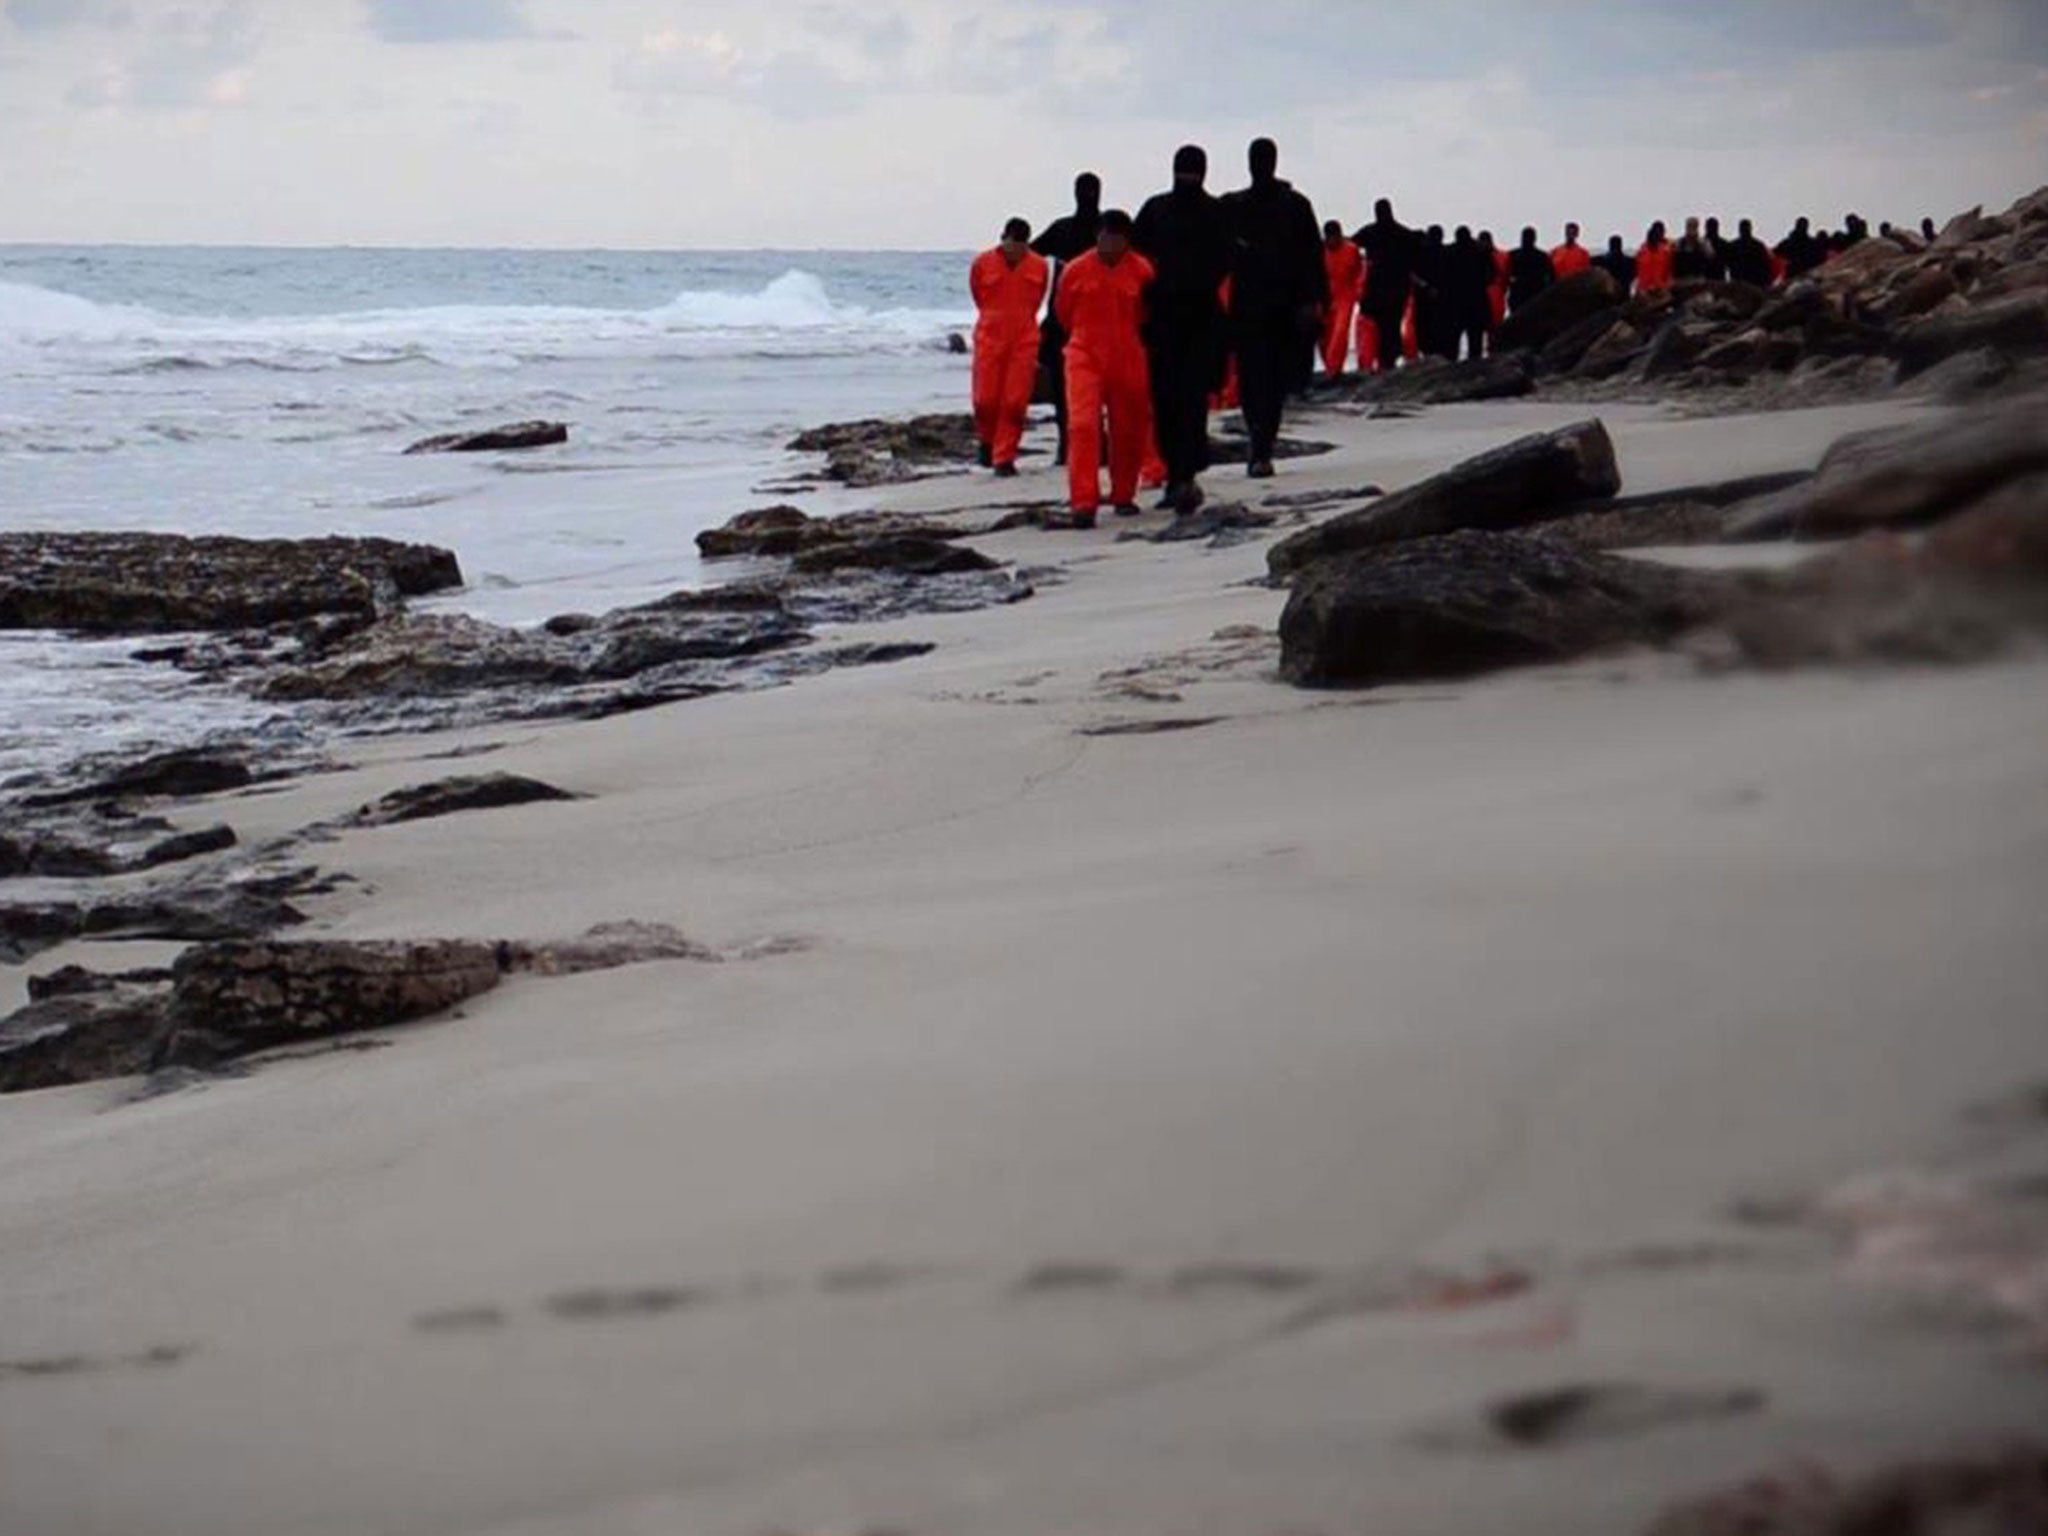 An image from a video released by the jihadist media arm Al-Hayat Media Centre purportedly shows black-clad Islamic State (IS) group fighters leading handcuffed hostages, said to be Egyptian Coptic Christians, wearing orange jumpsuits before their alleged